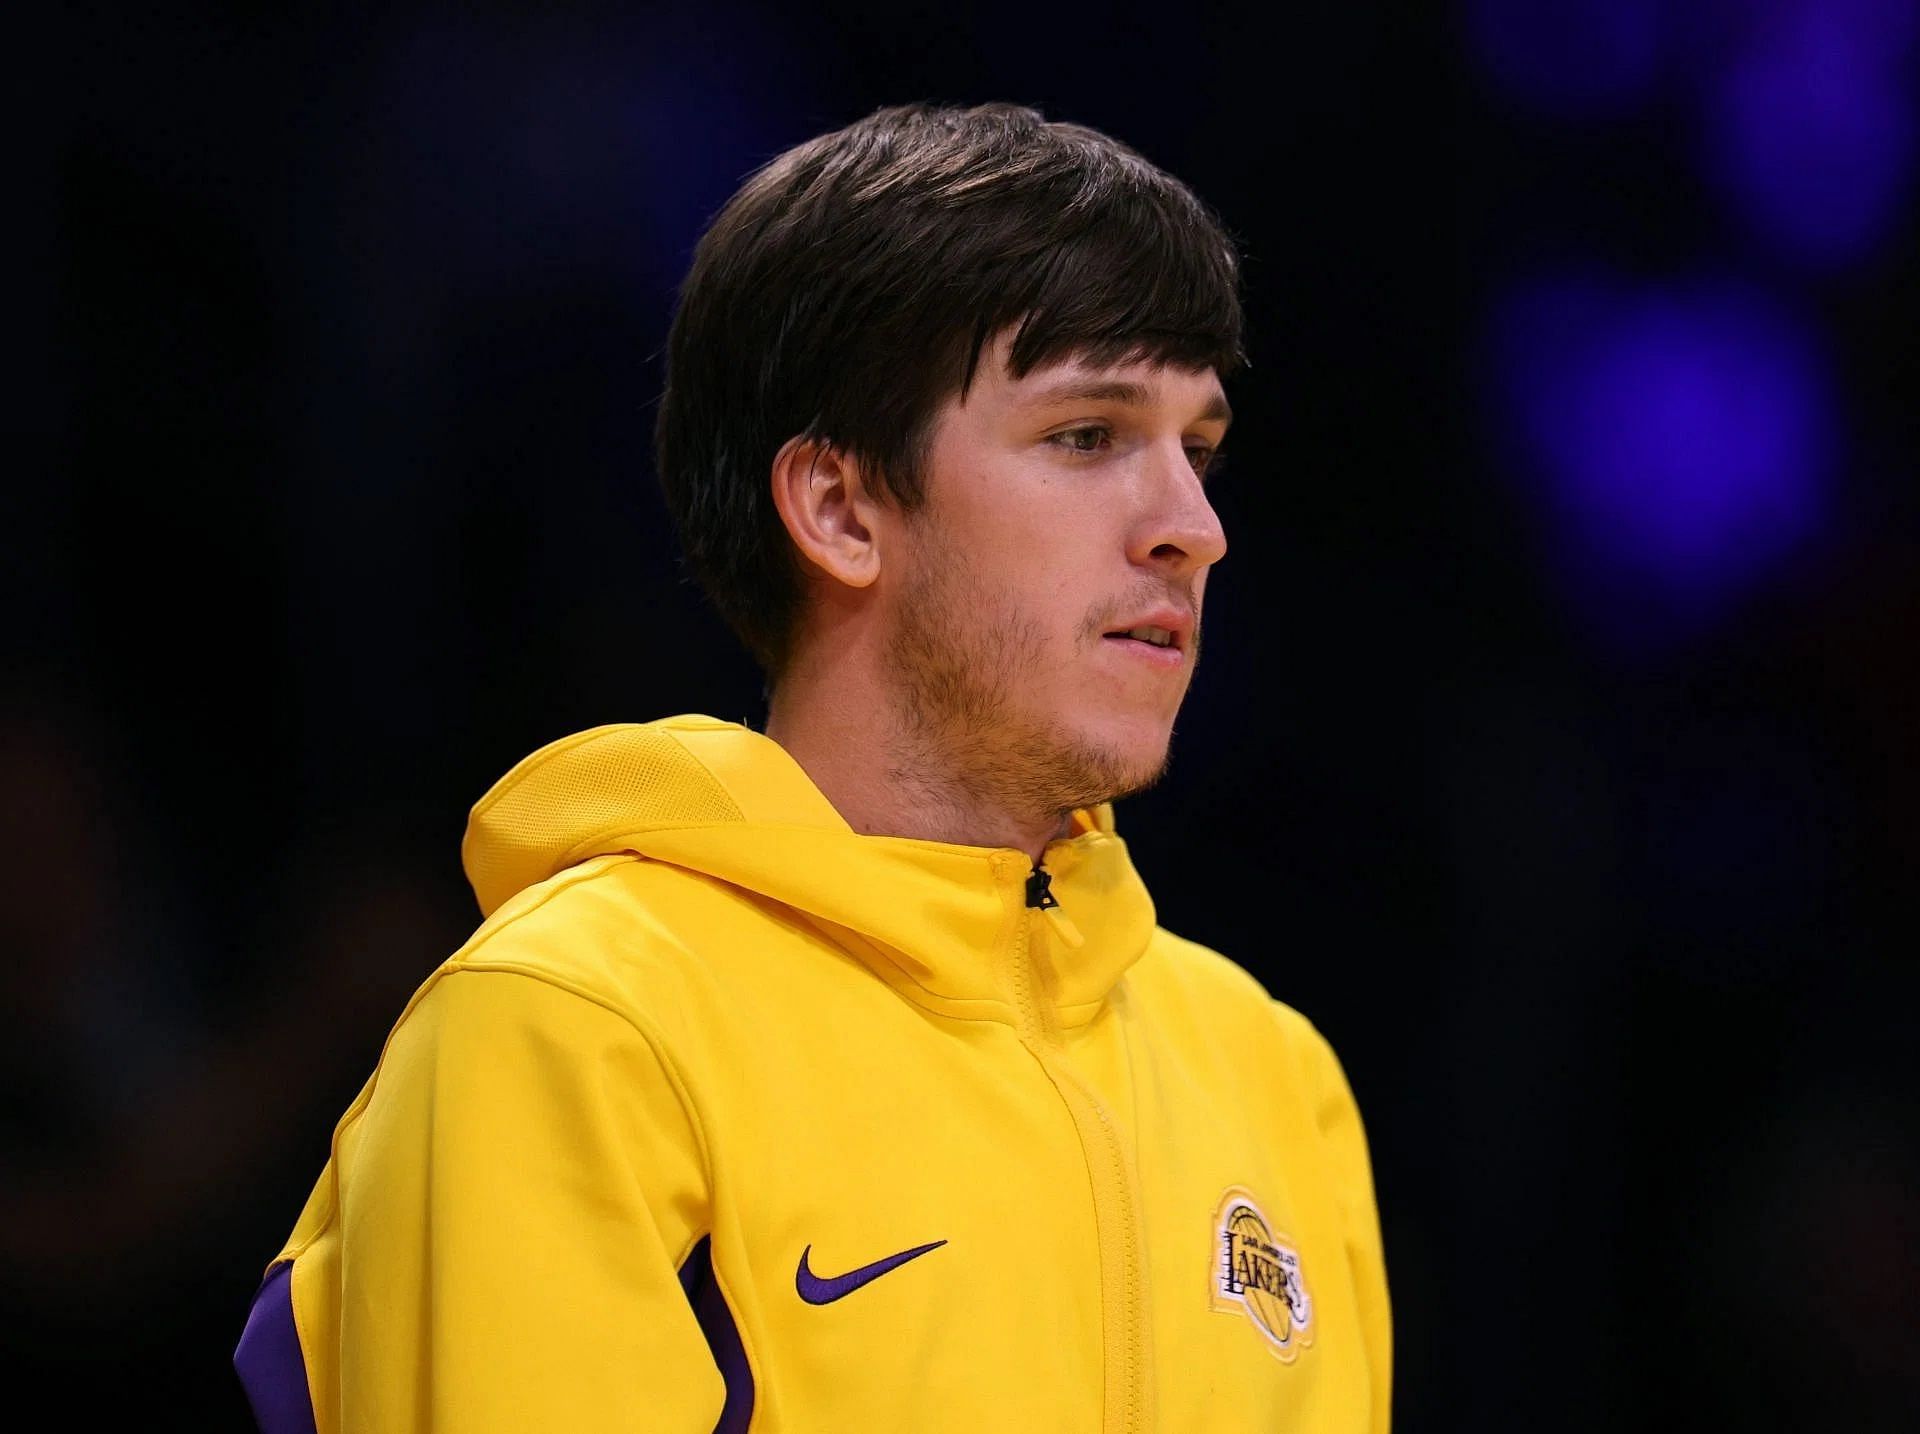 LA Lakers guard Austin Reaves said he has always played with a chip on his shoulder.